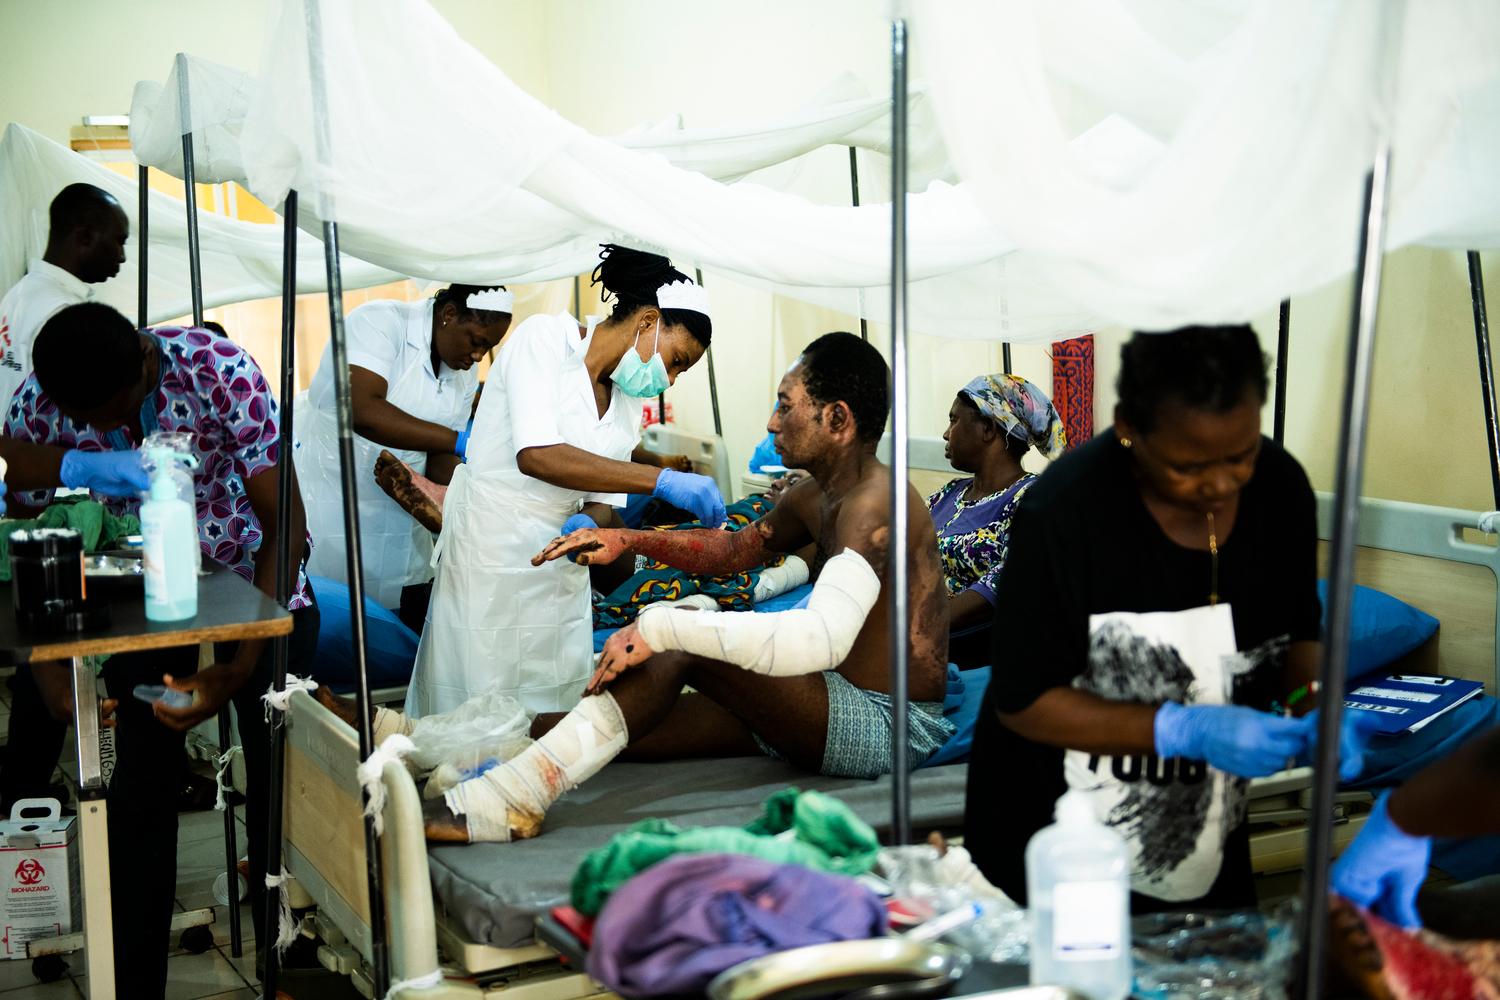 In the burns unit of Benue State University Hospital, an MSF nurse changes the bandages of a patient injured in an oil tanker explosion. Nigeria, August 2019. 